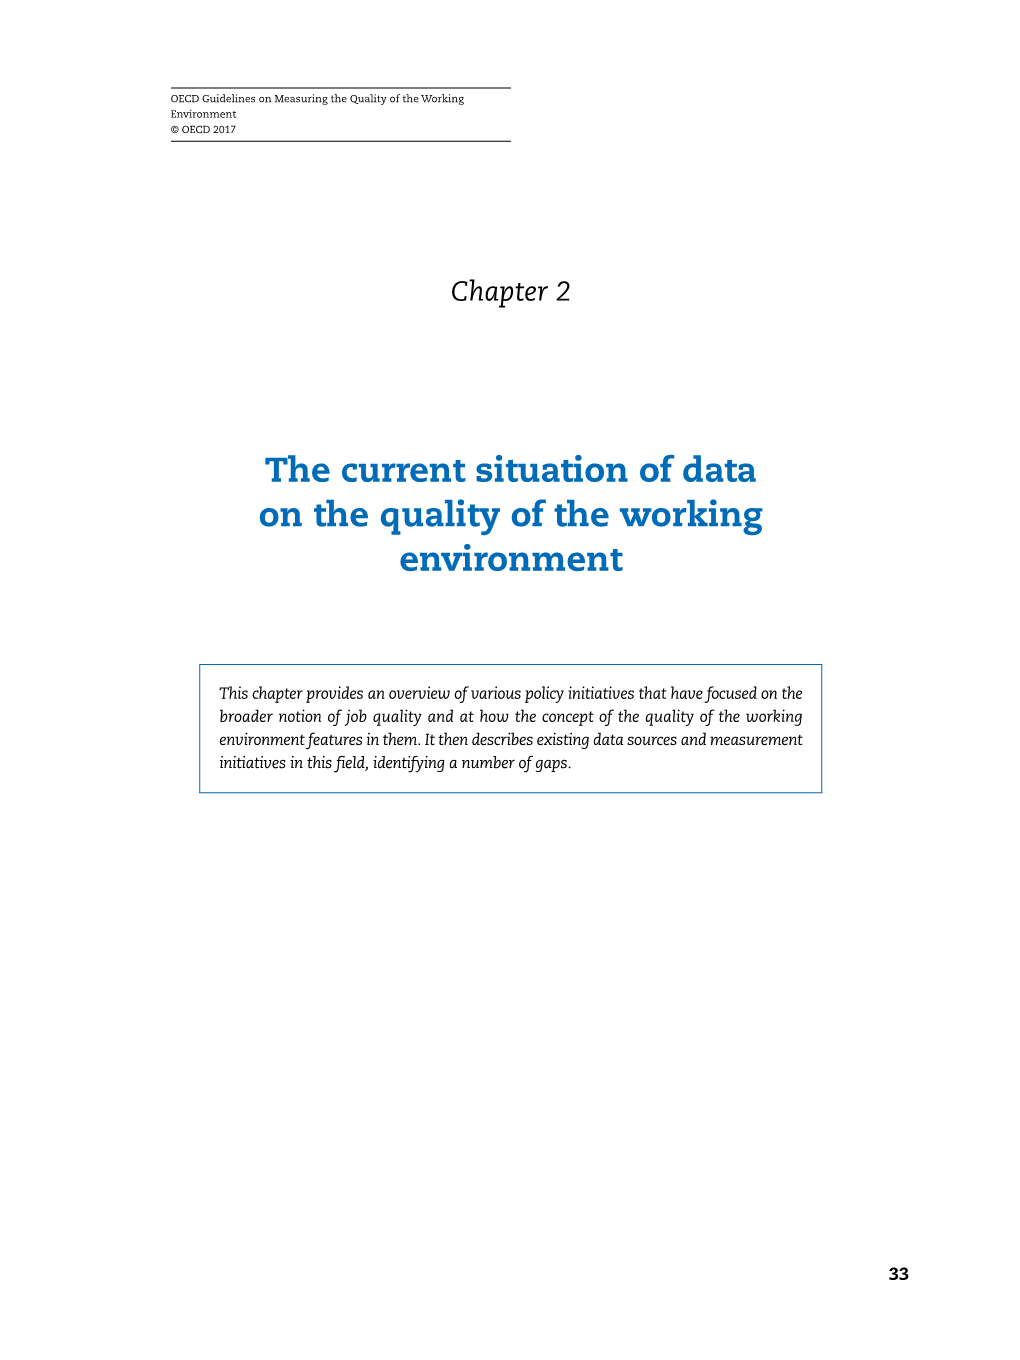 The Current Situation of Data on the Quality of the Working Environment